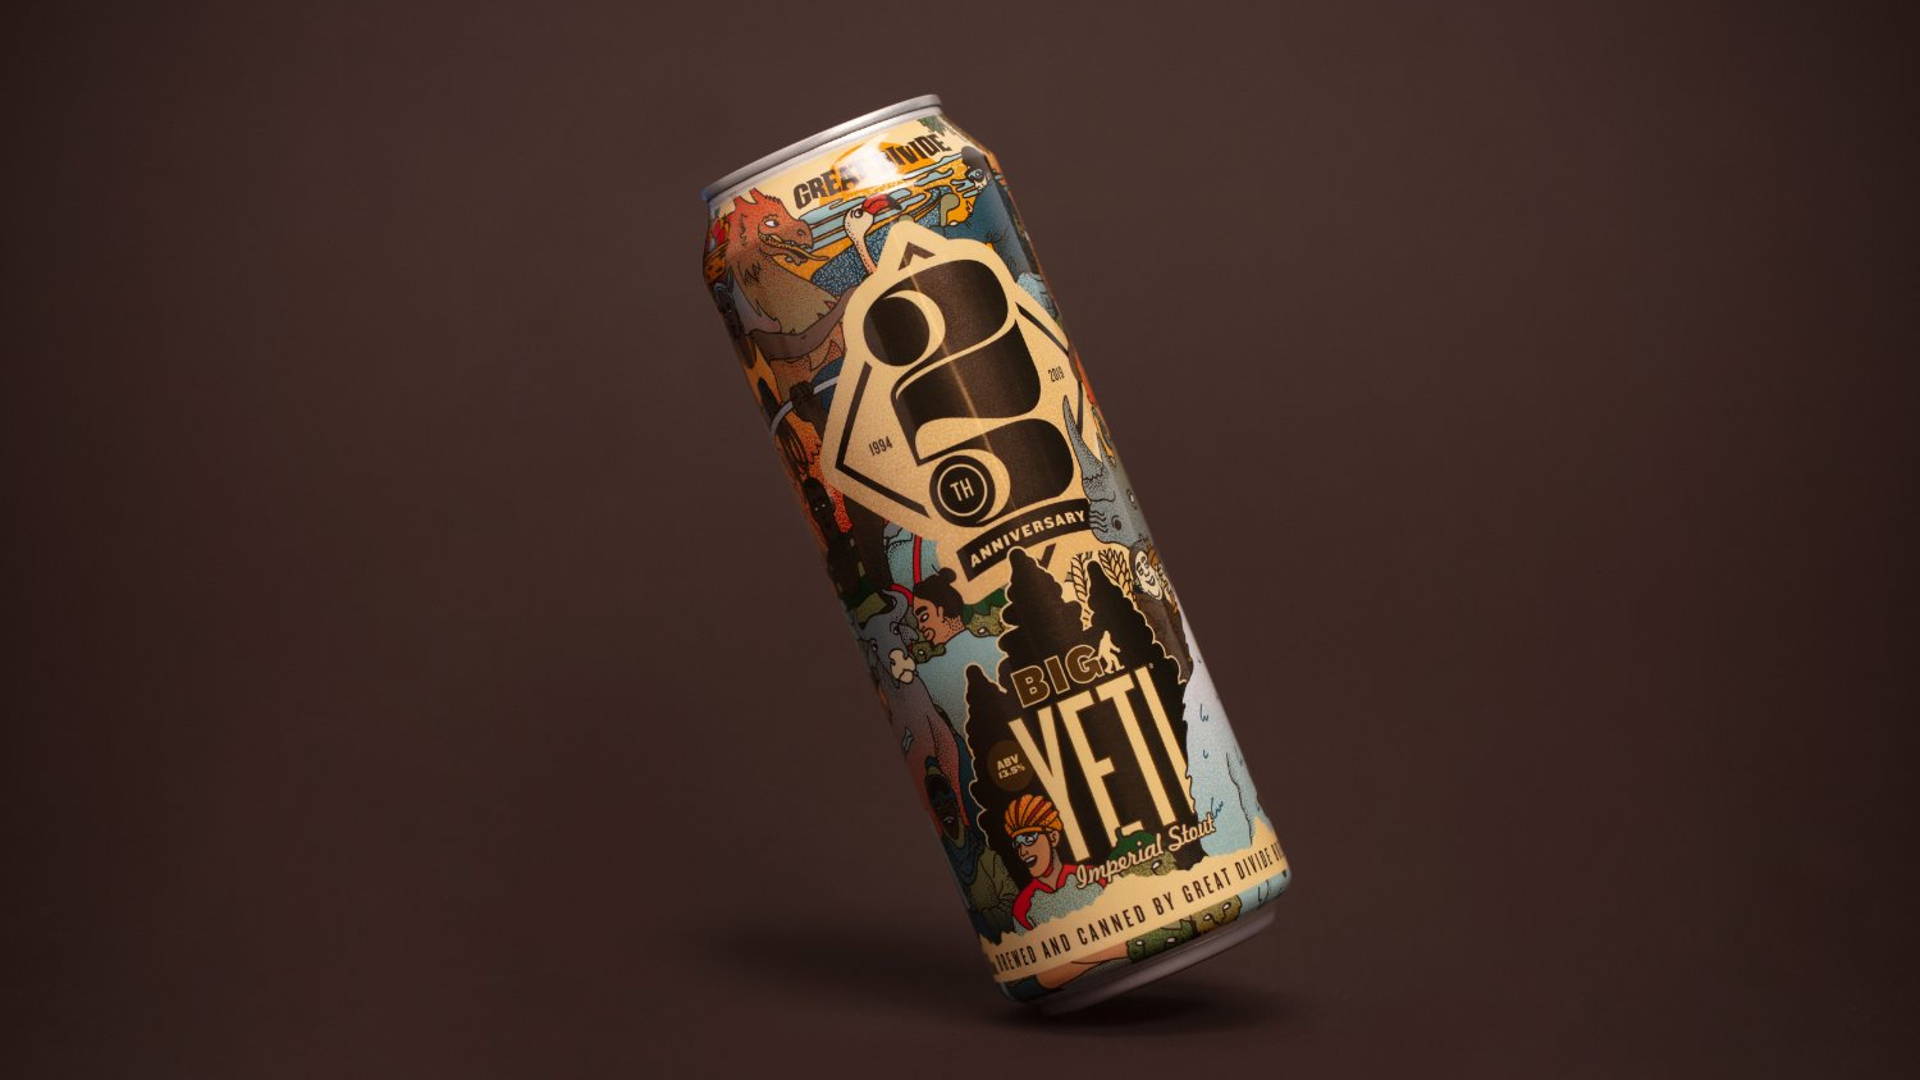 Featured image for Great Divide Celebrates Their 25th Anniversary With Yeti Beer